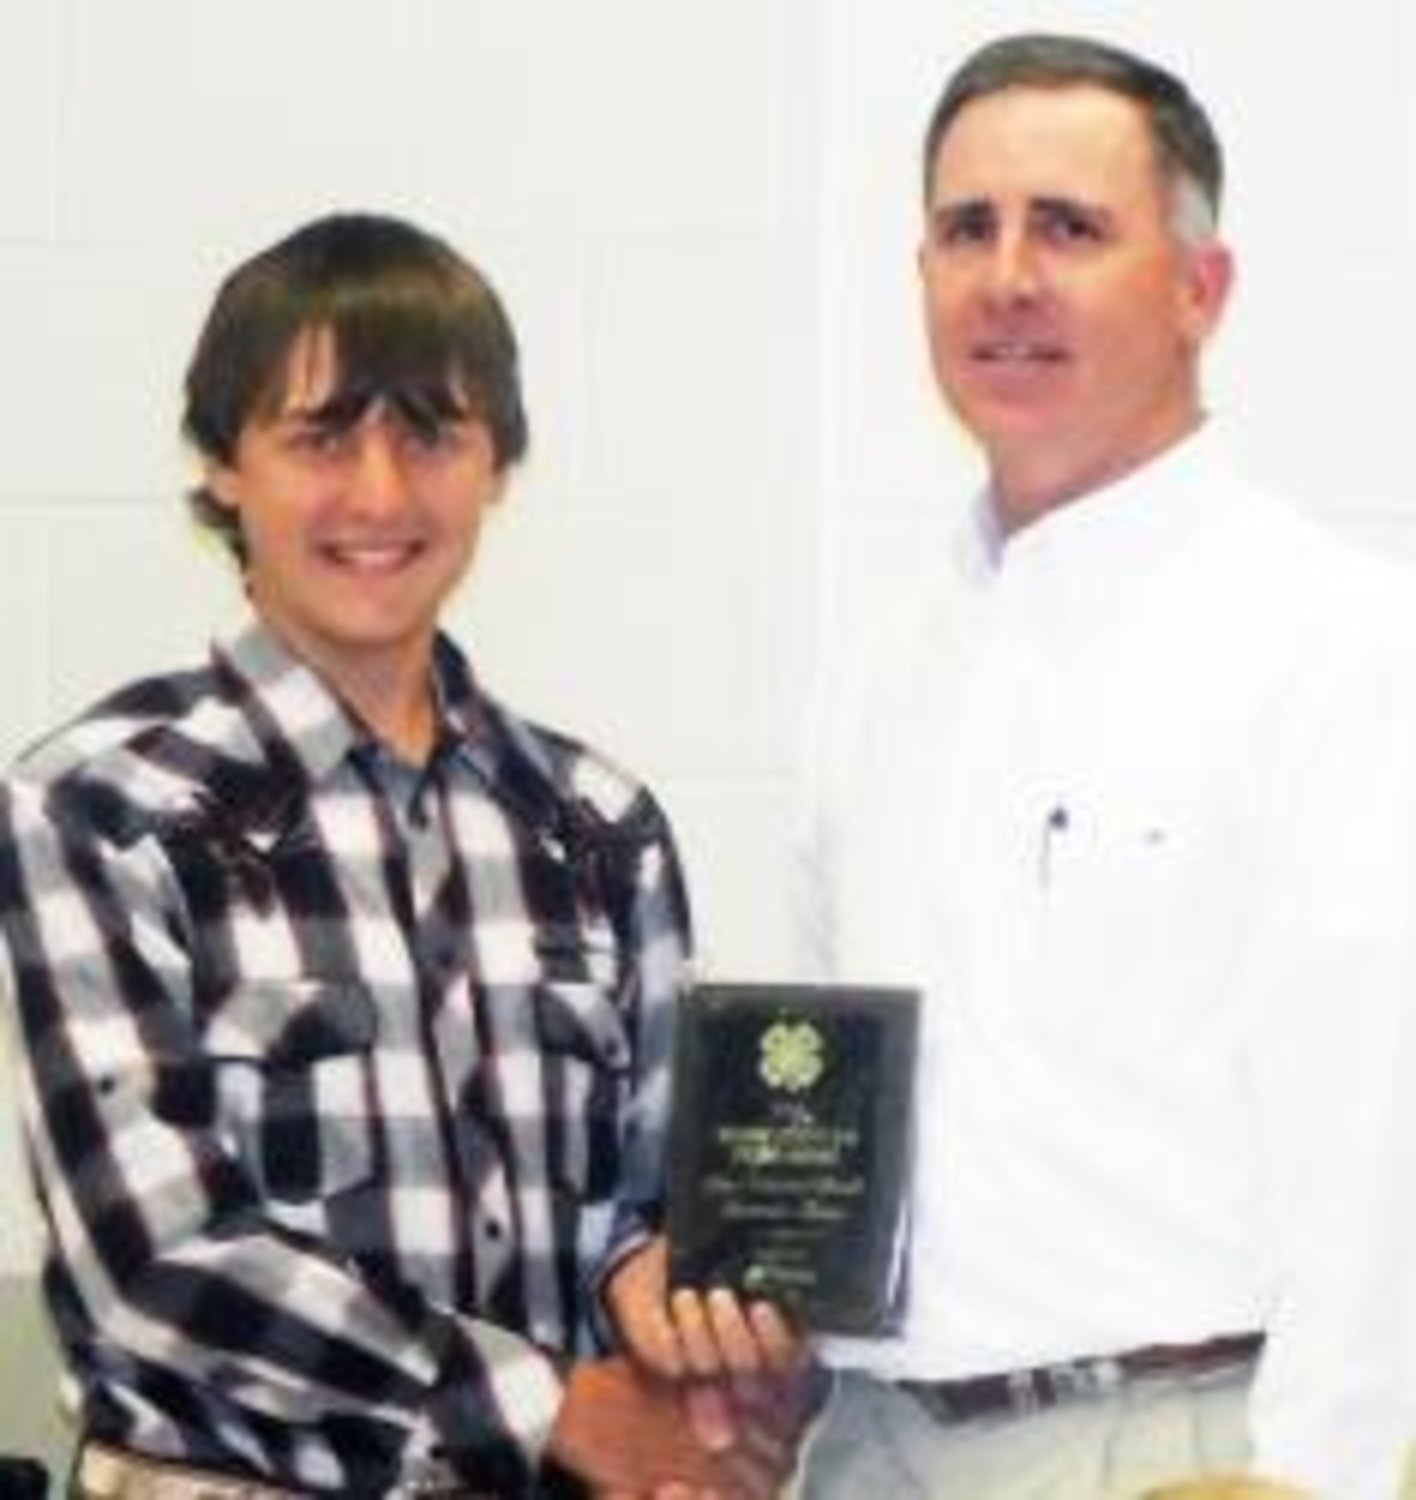 The 2013 "Friend of 4-H" award was given to City National Bank of Quitman. Jerry Jackson (right) accepted the award on the bank's behalf from Tud Krier(left), 4-H Council 2nd Vice President.